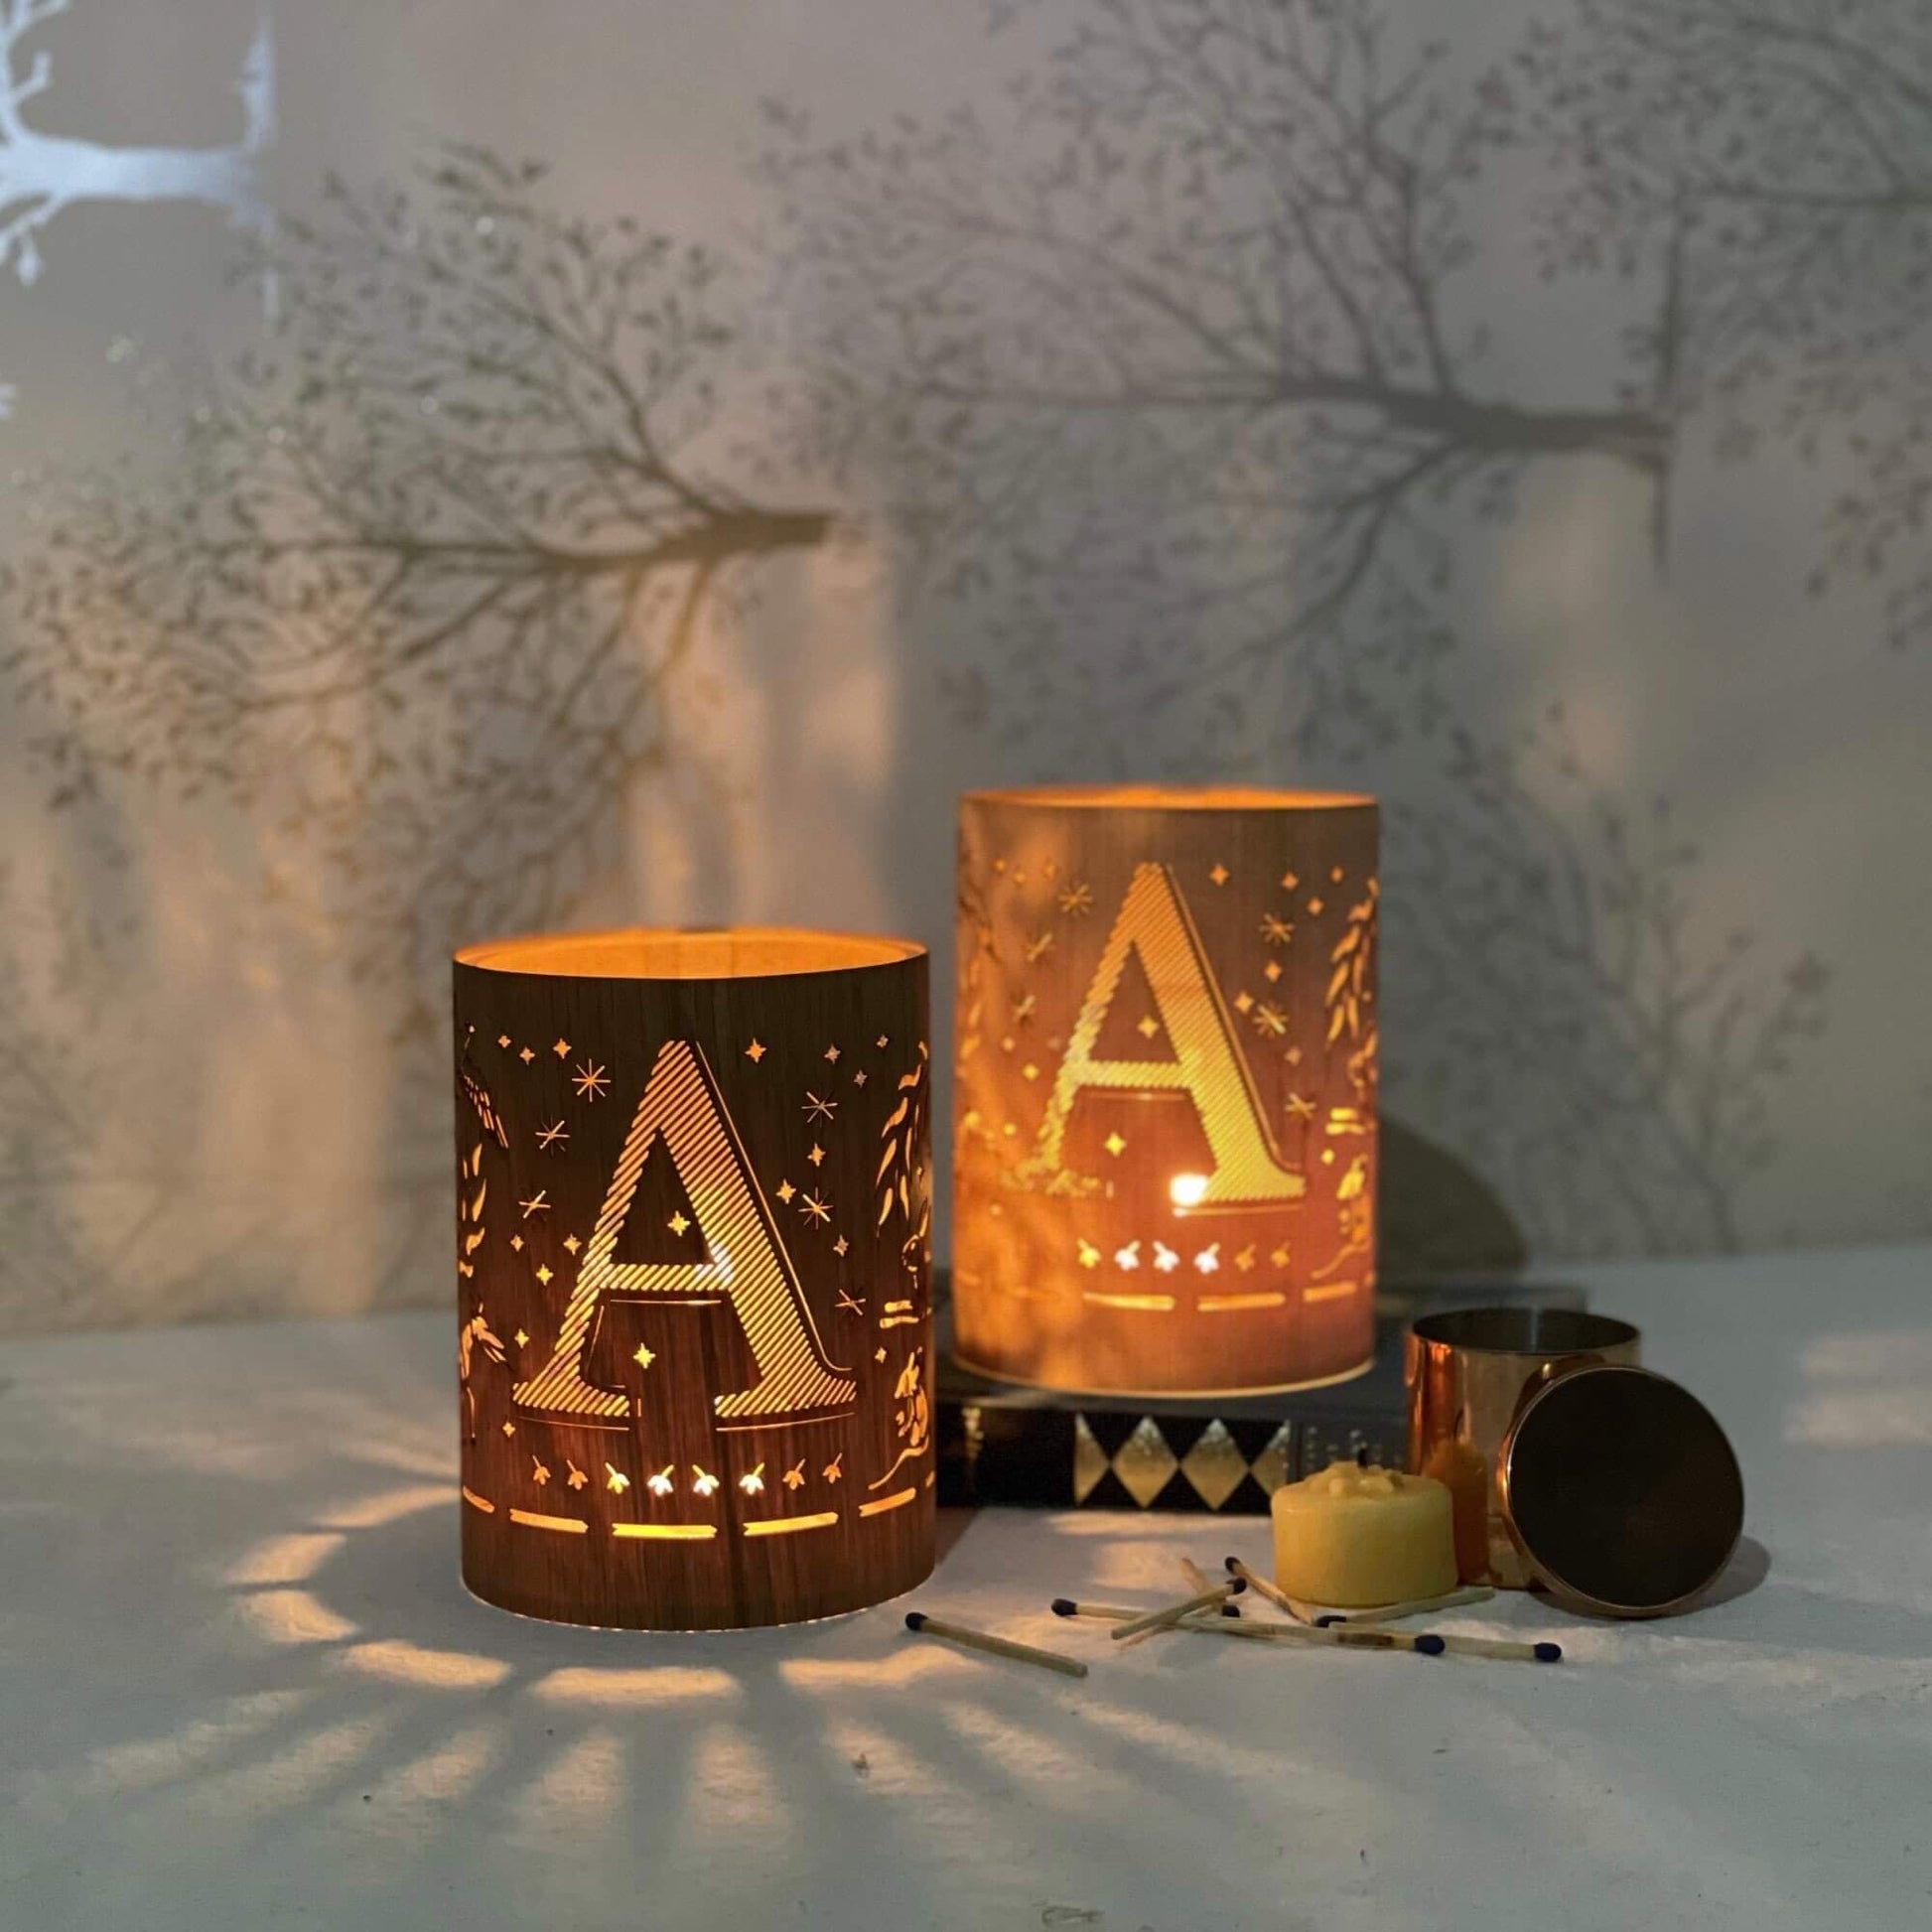 LETTER A MONOGRAM LANTERN - available in white oak or maple beautiful illuminated letters